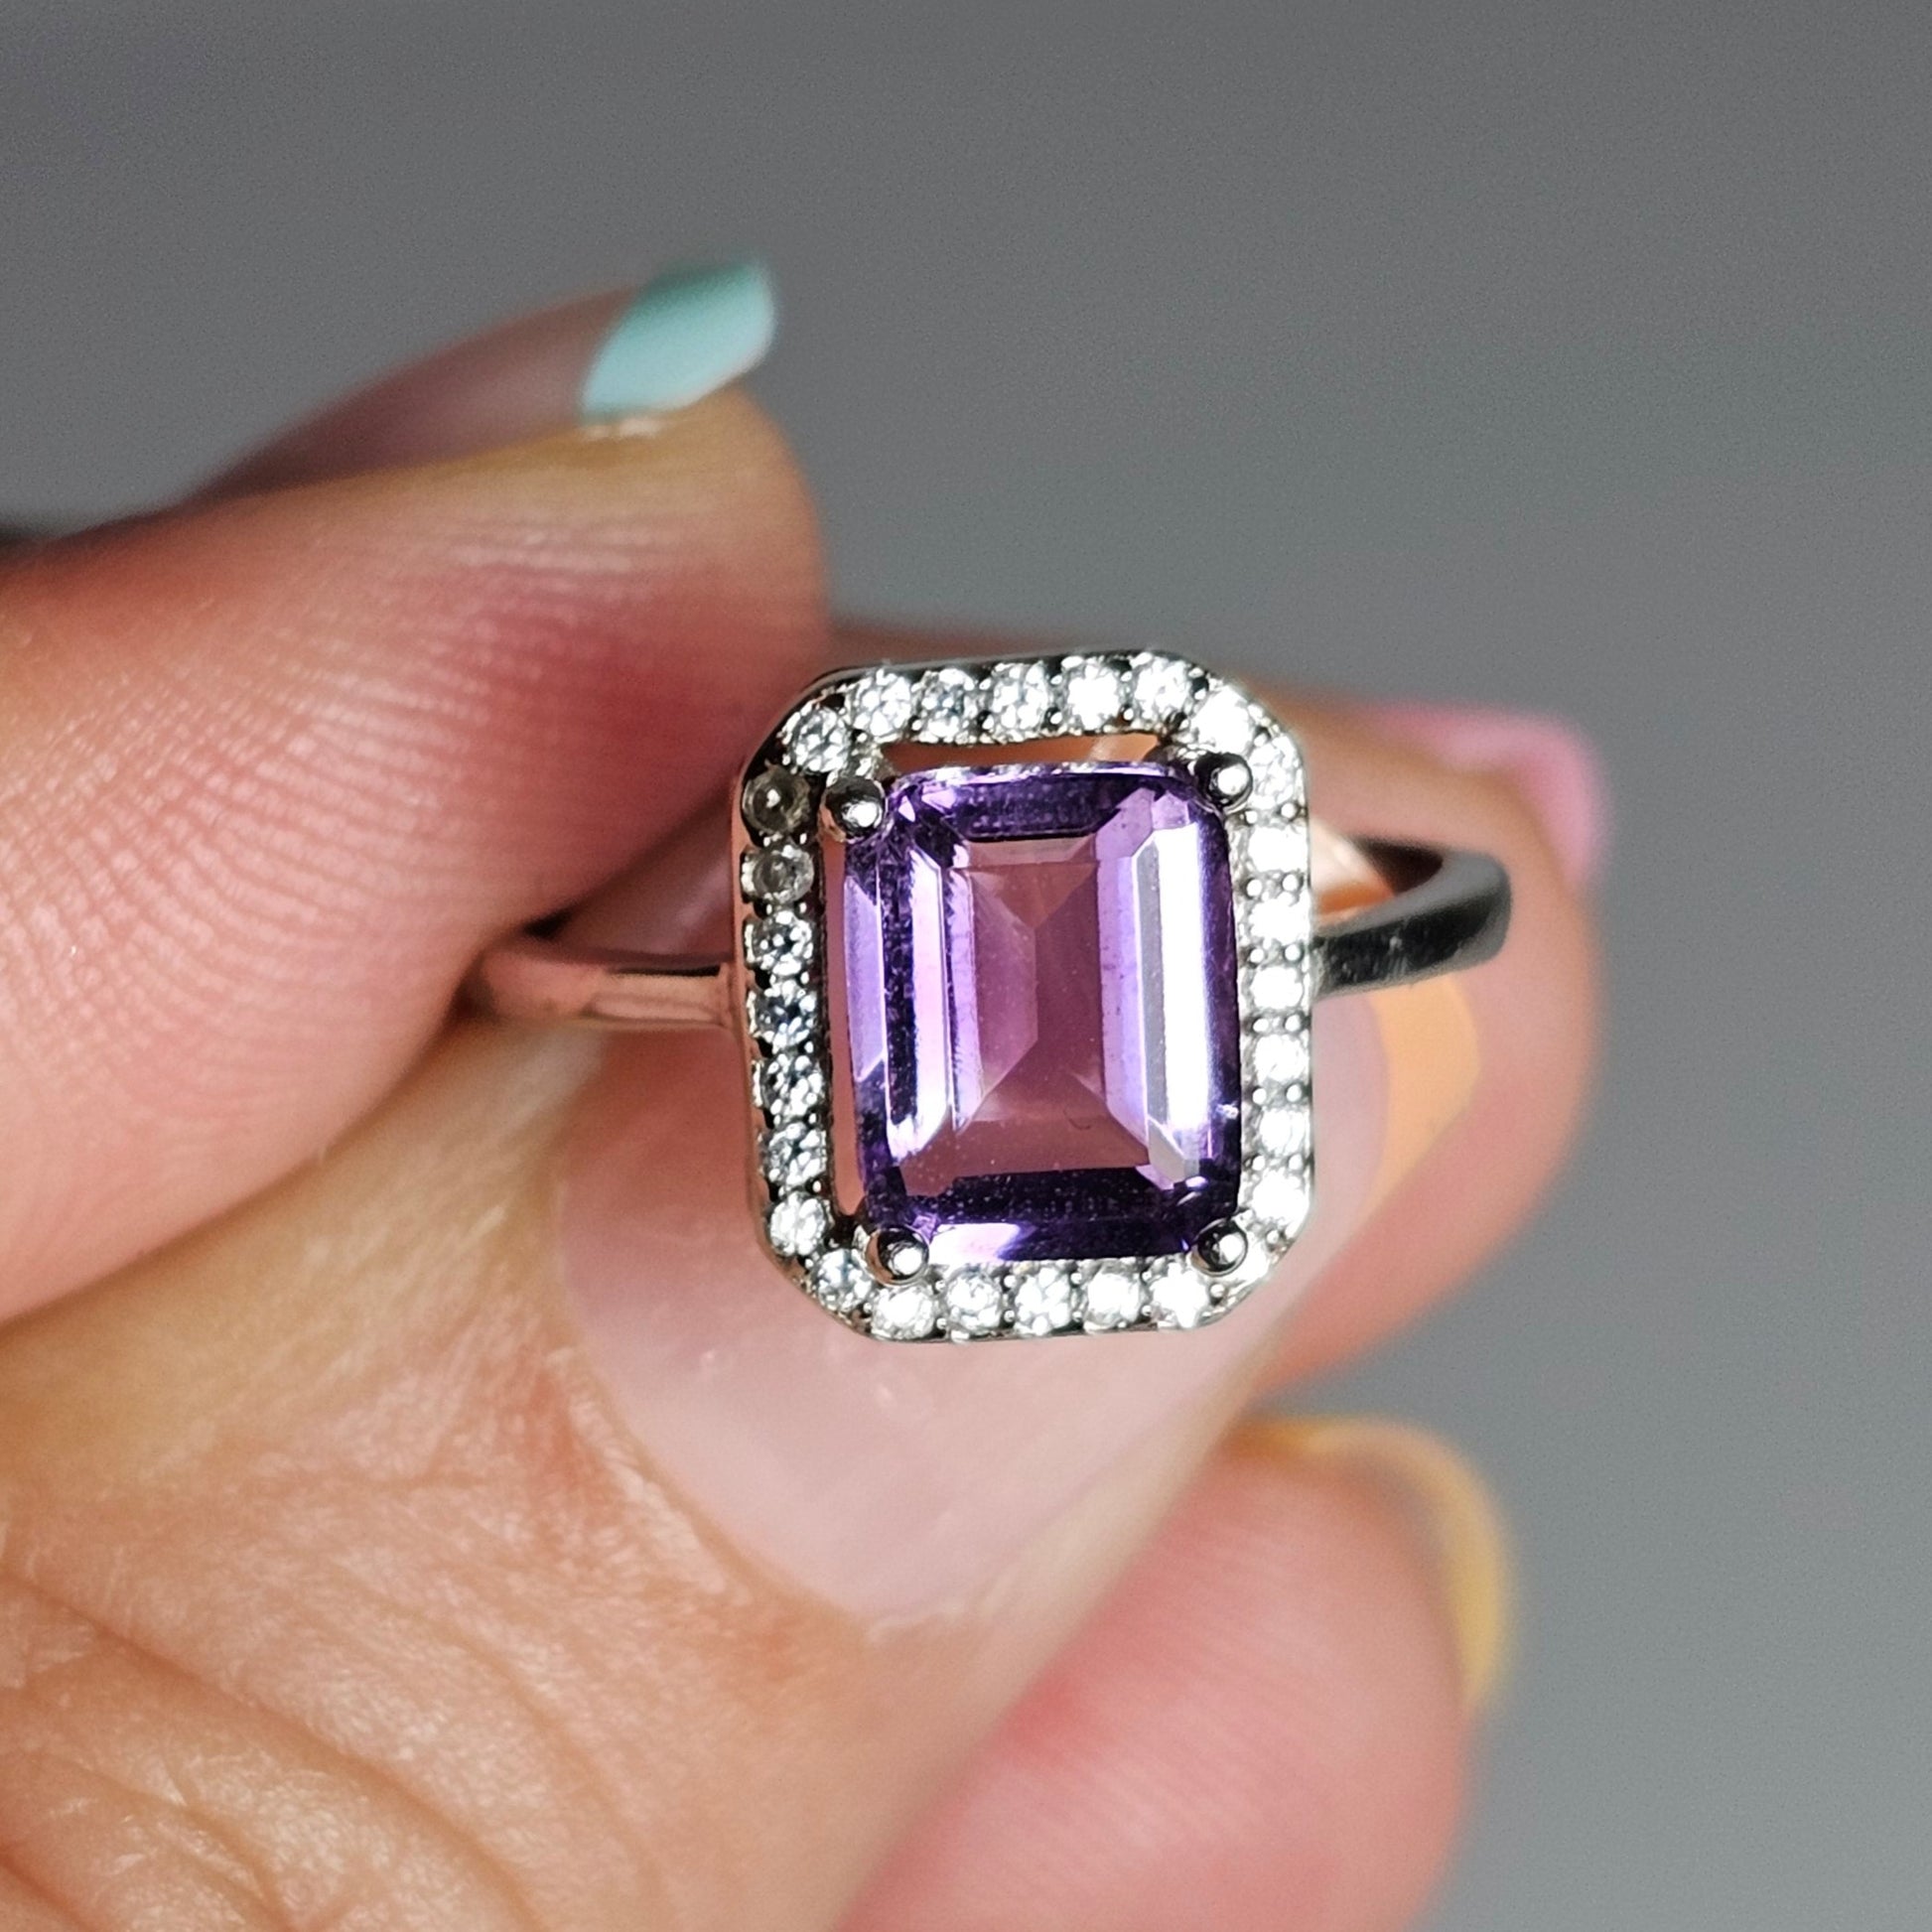 This ring is crafted from sterling silver and features a gorgeous rectangular shaped Amethyst with a Zircon accented crown.